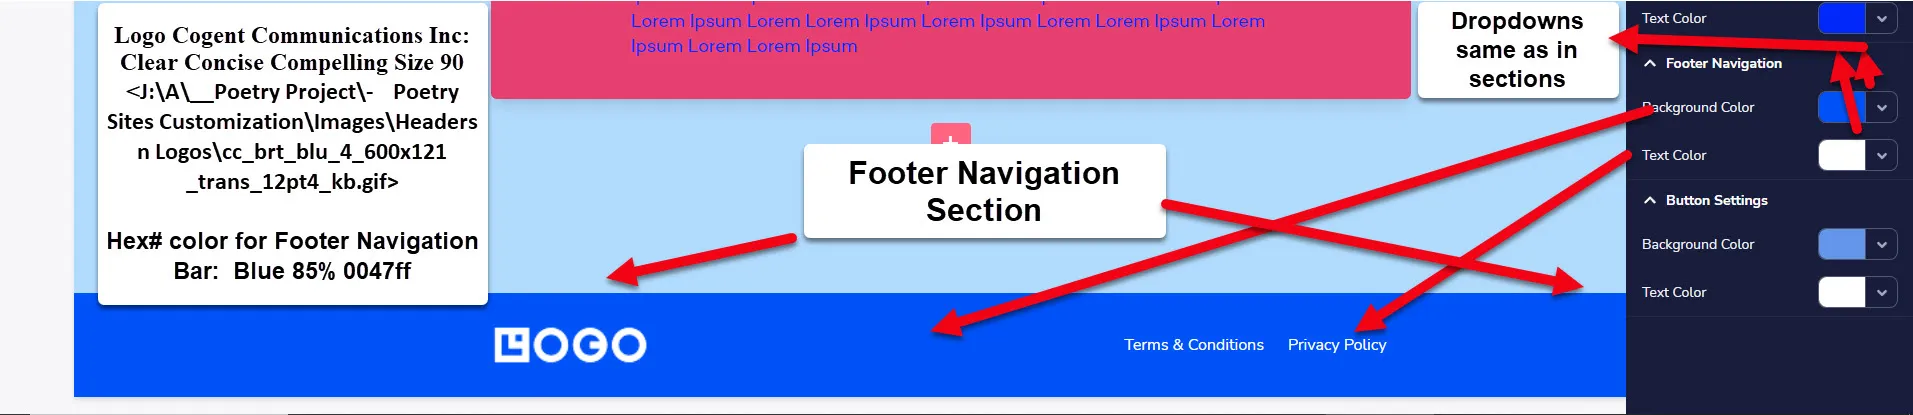 4 Footer Navigation Section